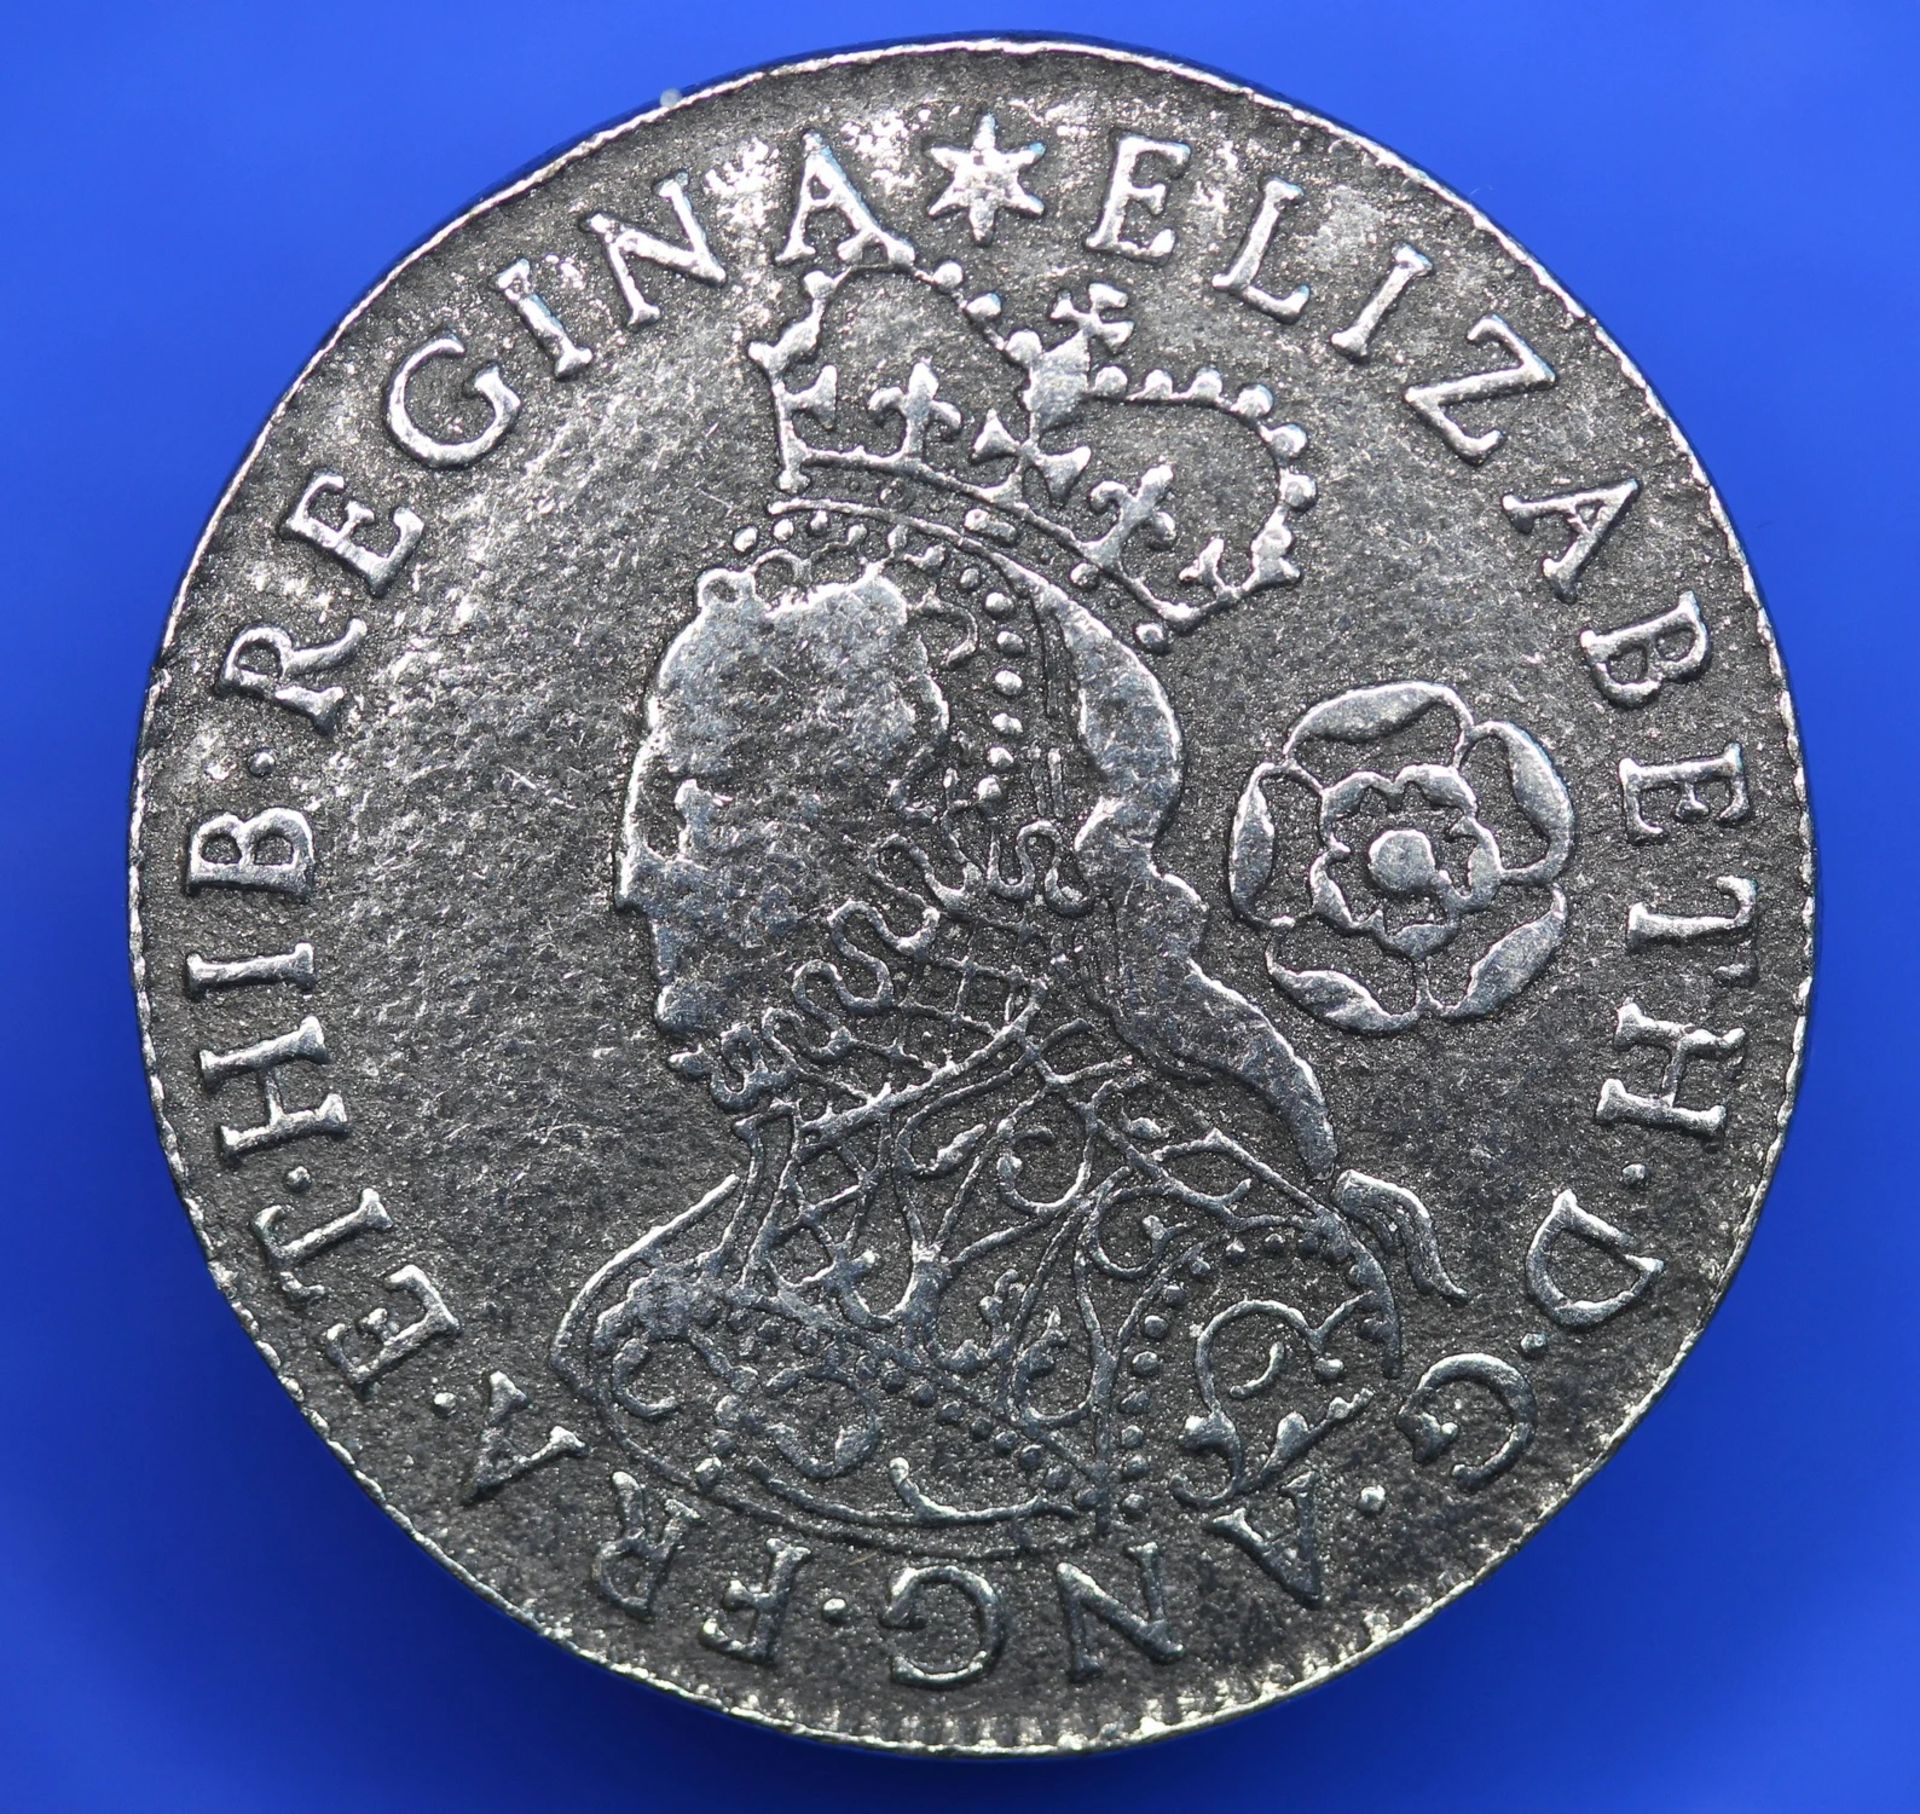 Reproduction 1562 Elizabeth I Sixpence 6d Coin 24mm A Reproduction Sixpence Coin With The Bust Of